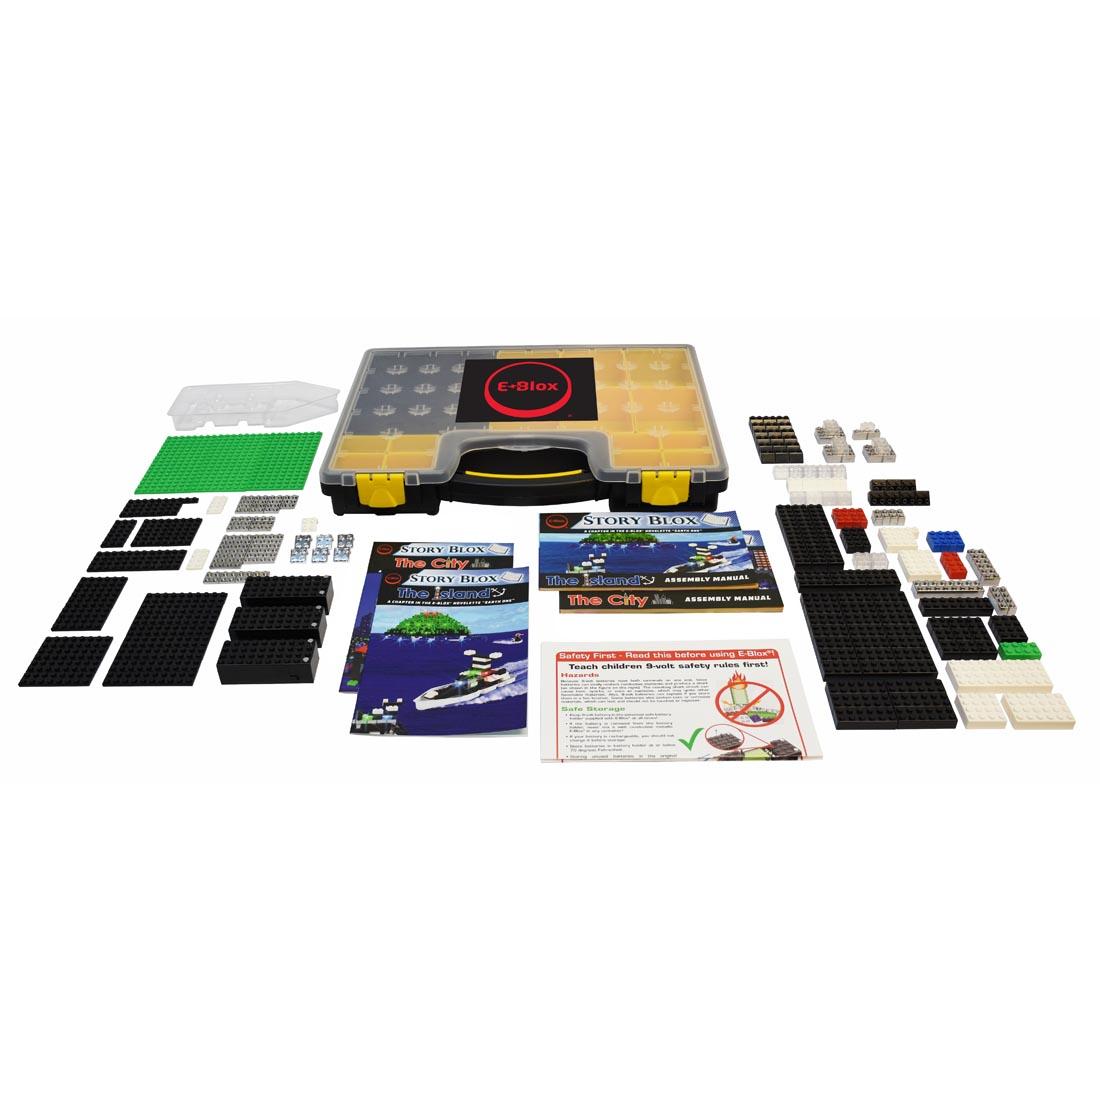 Contents of the E-Blox Story Blox 3-In-1 Classroom Set